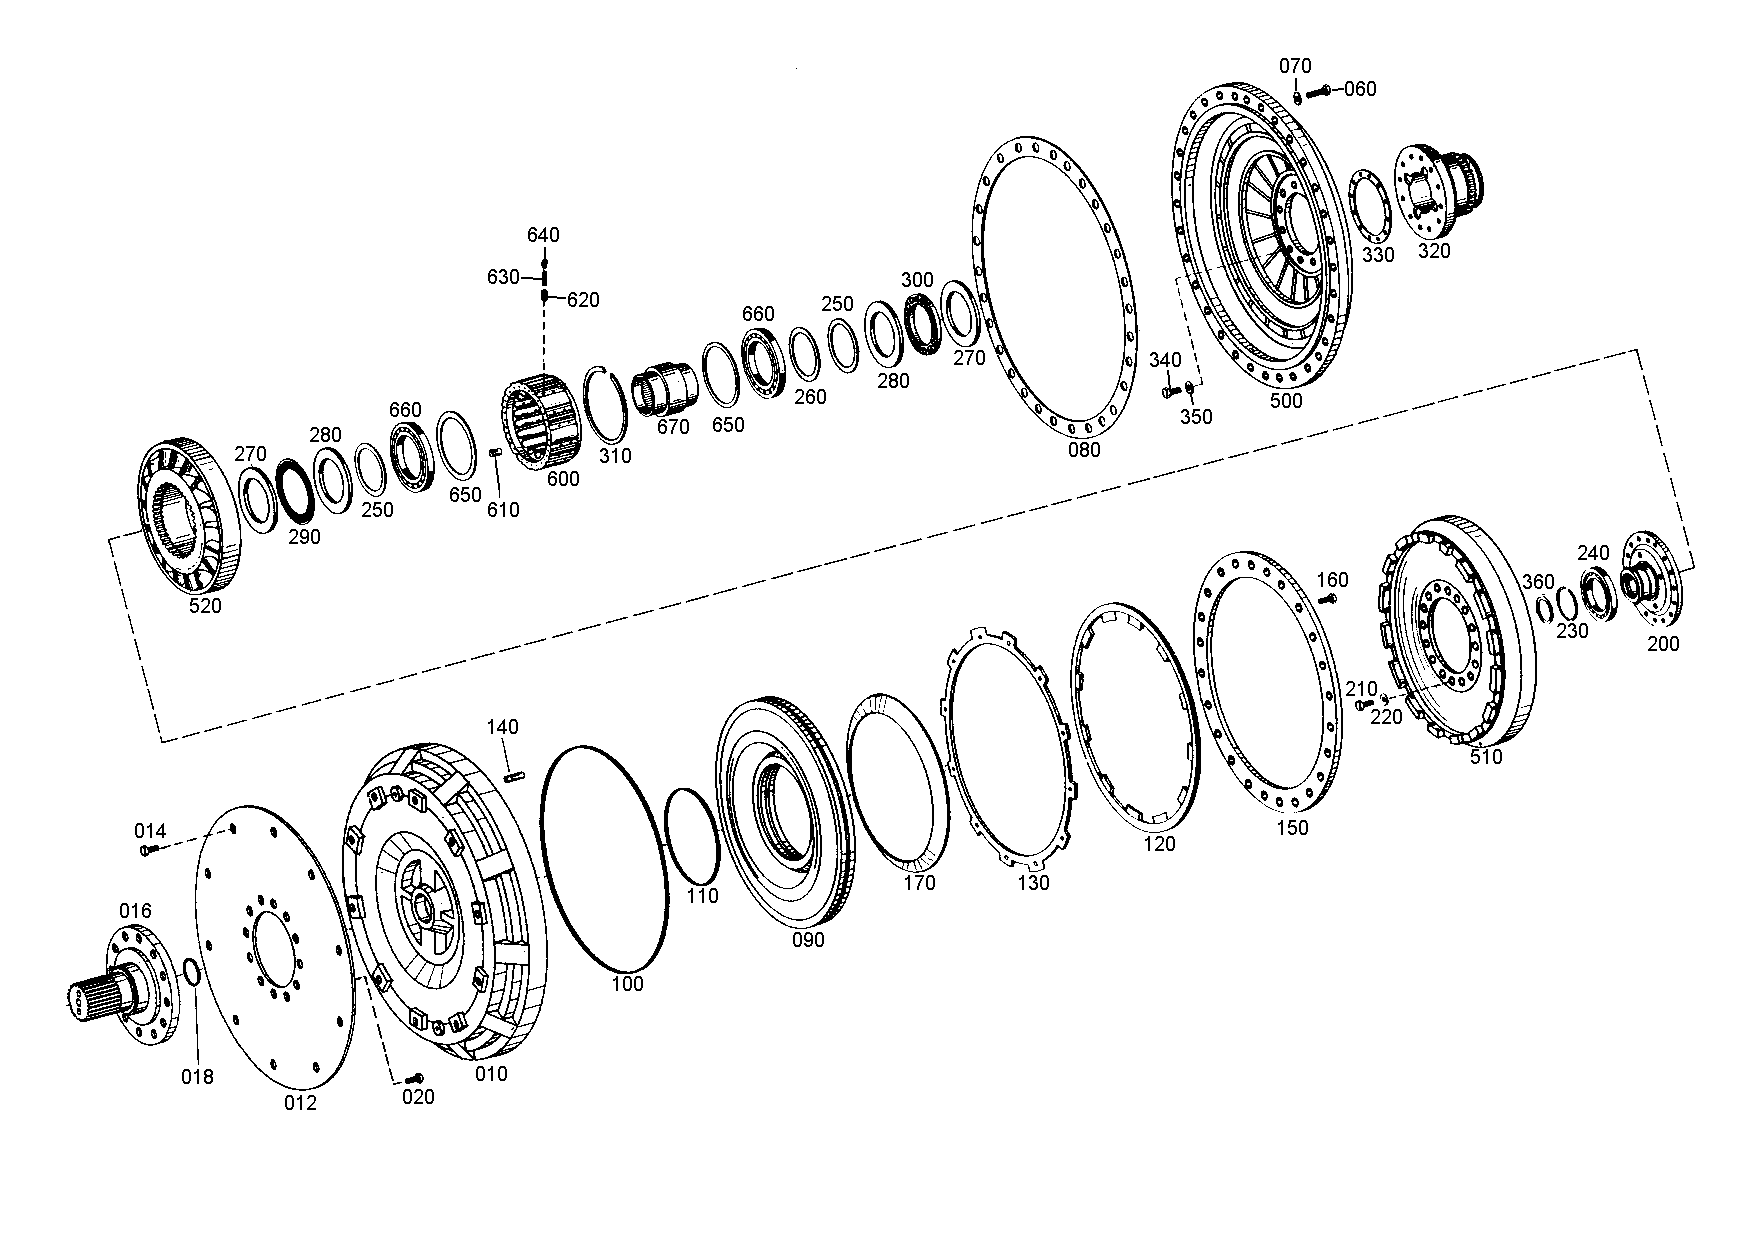 drawing for BEISSBARTH & MUELLER GMBH & CO. 09398168 - RECTANGULAR RING